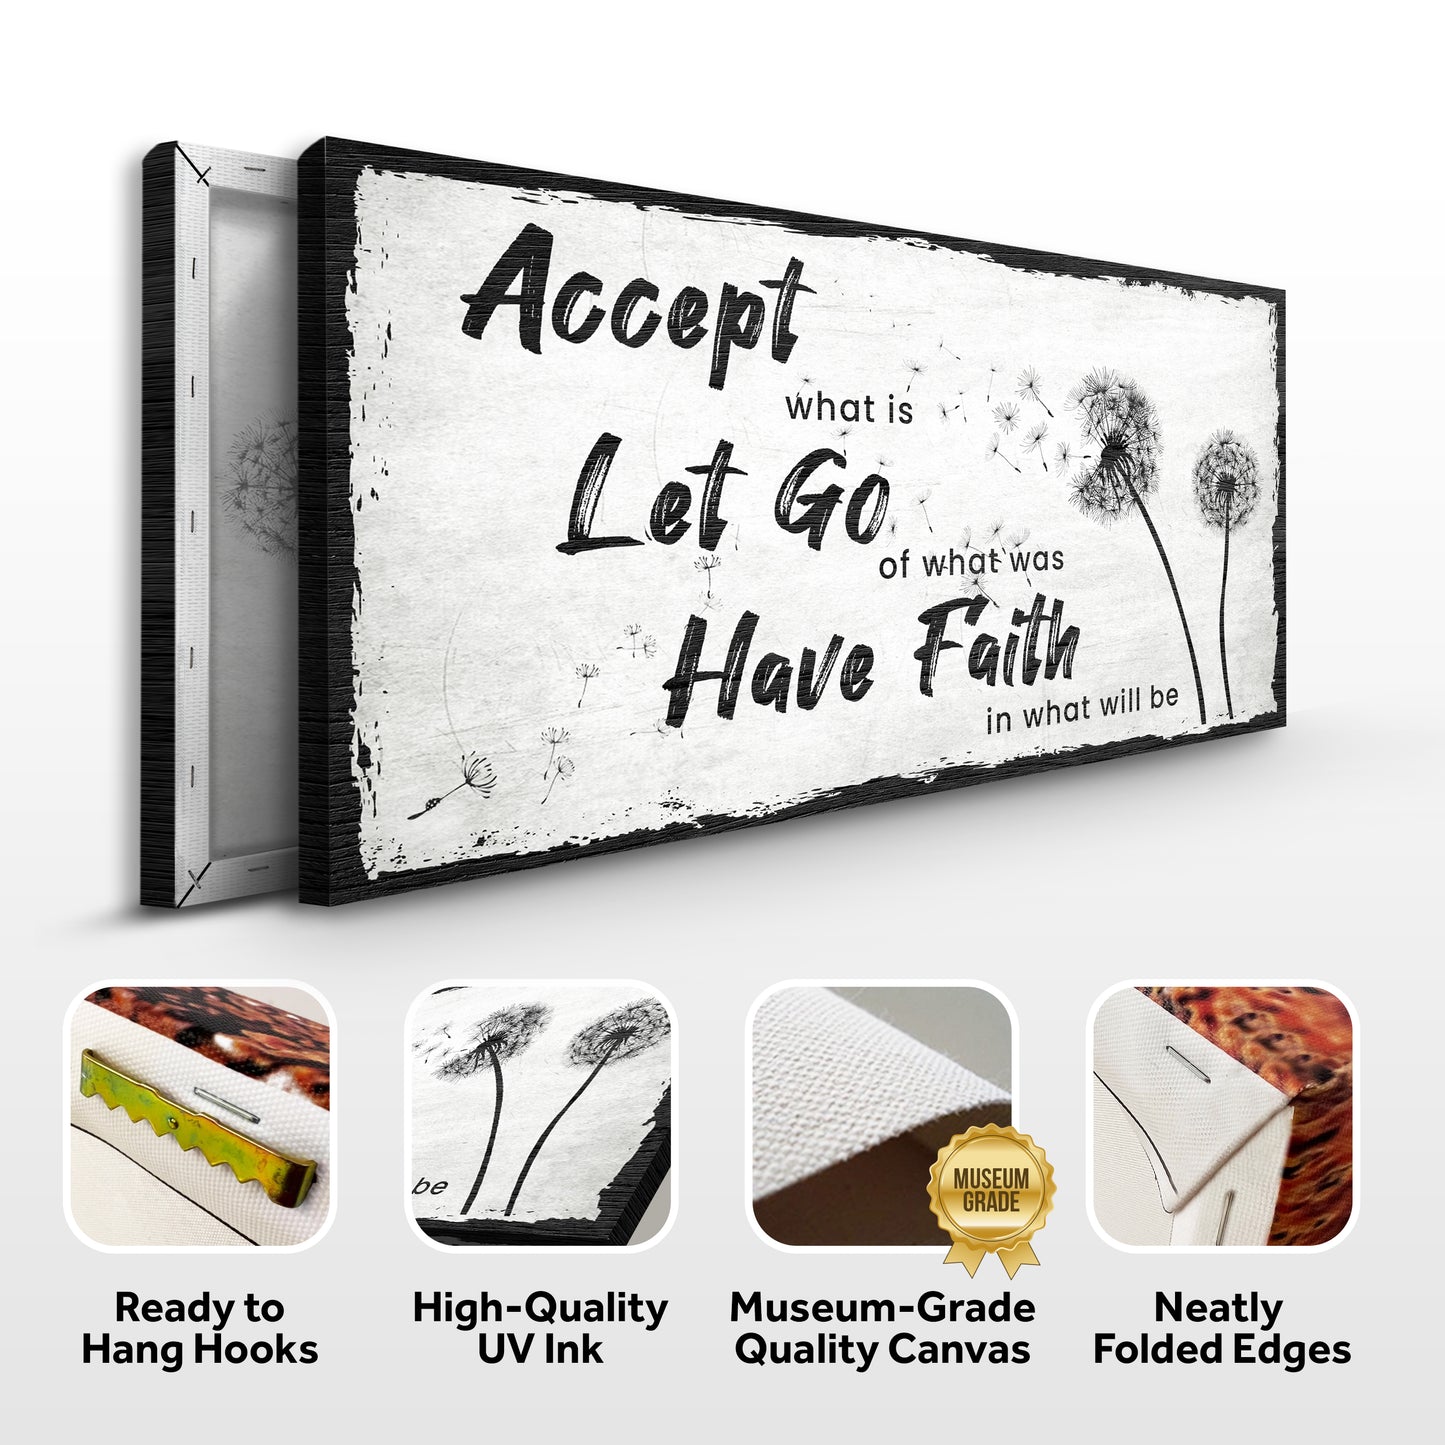 Accept, Let Go, Have Faith Sign (Free Shipping)